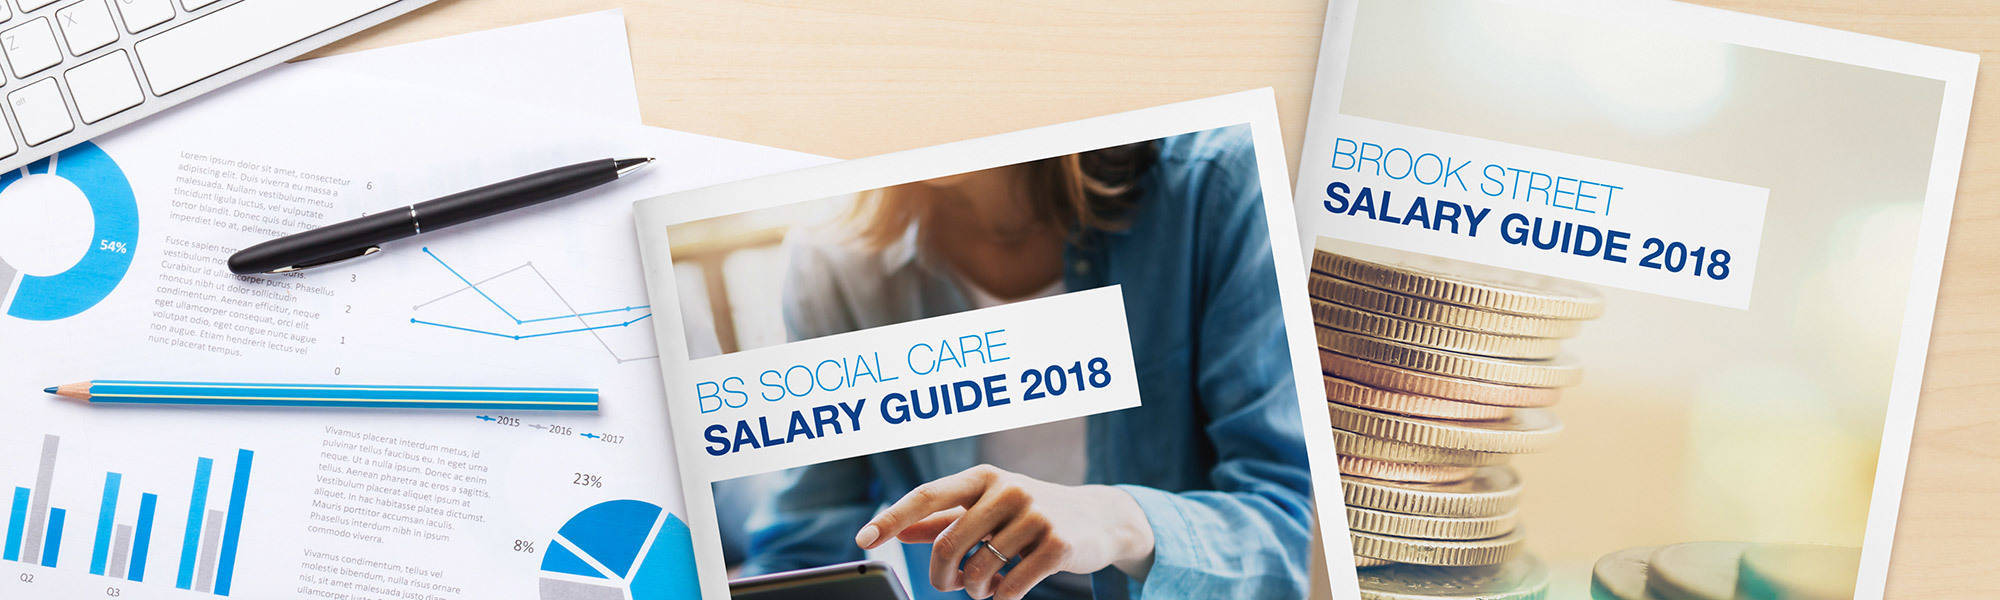 Salary Guides Mock Up For Website